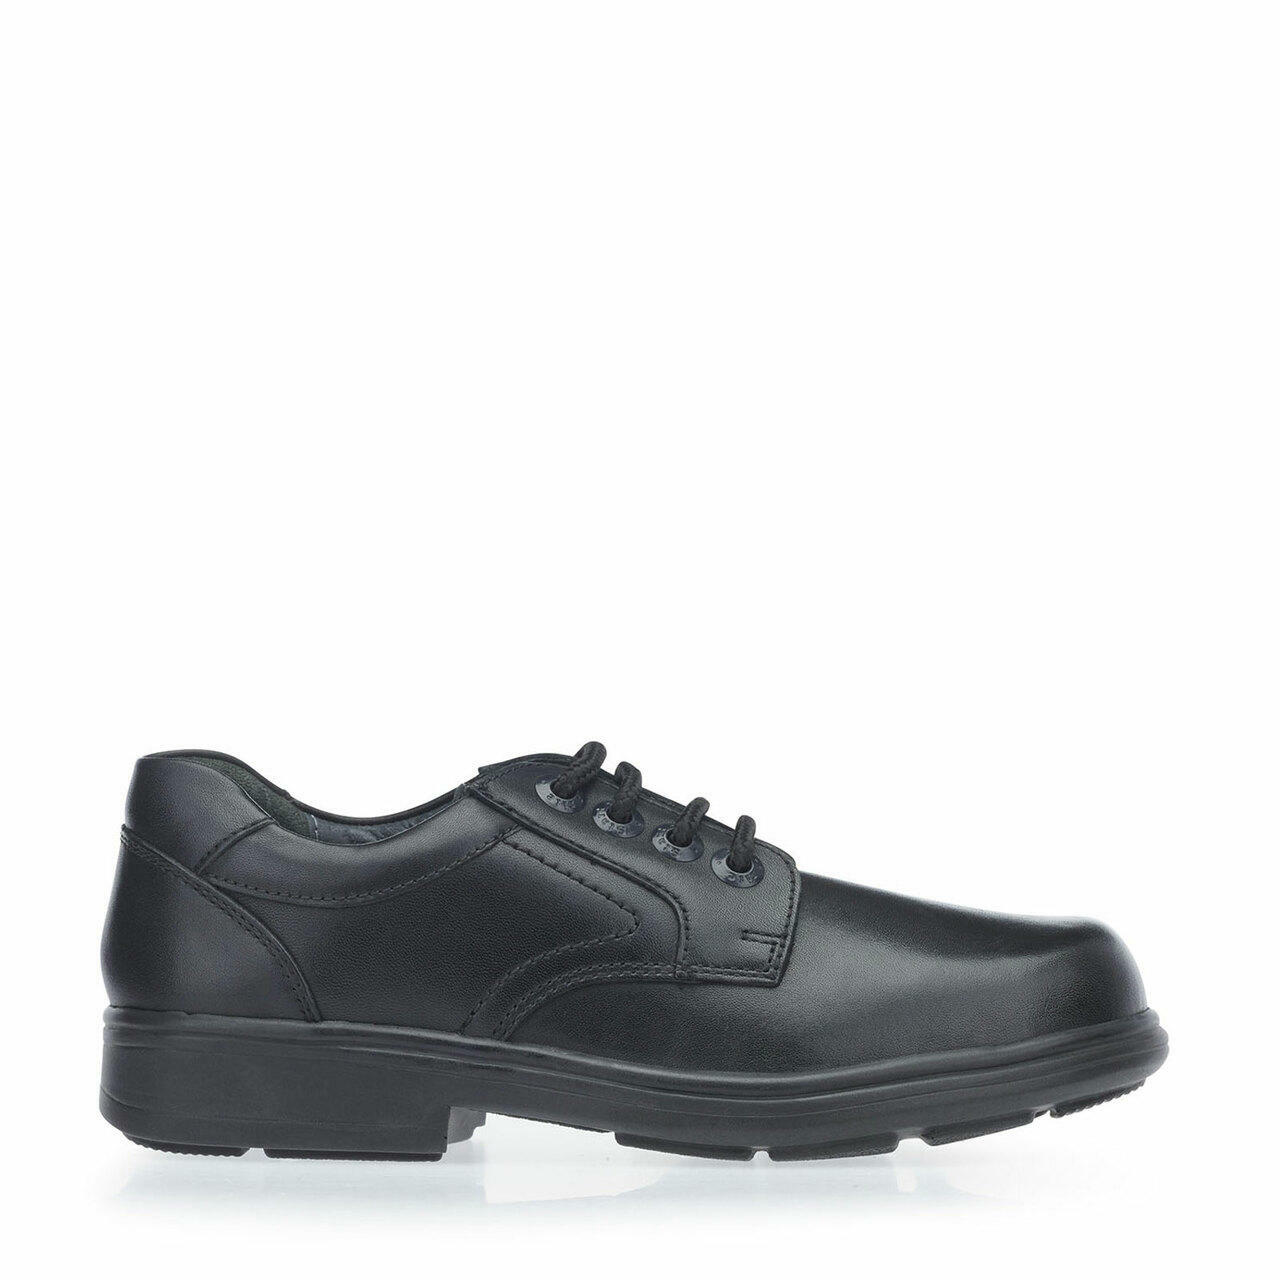 A boys school shoe by Start Rite,style Isaac, in black leather with lace up fastening. Right side view.